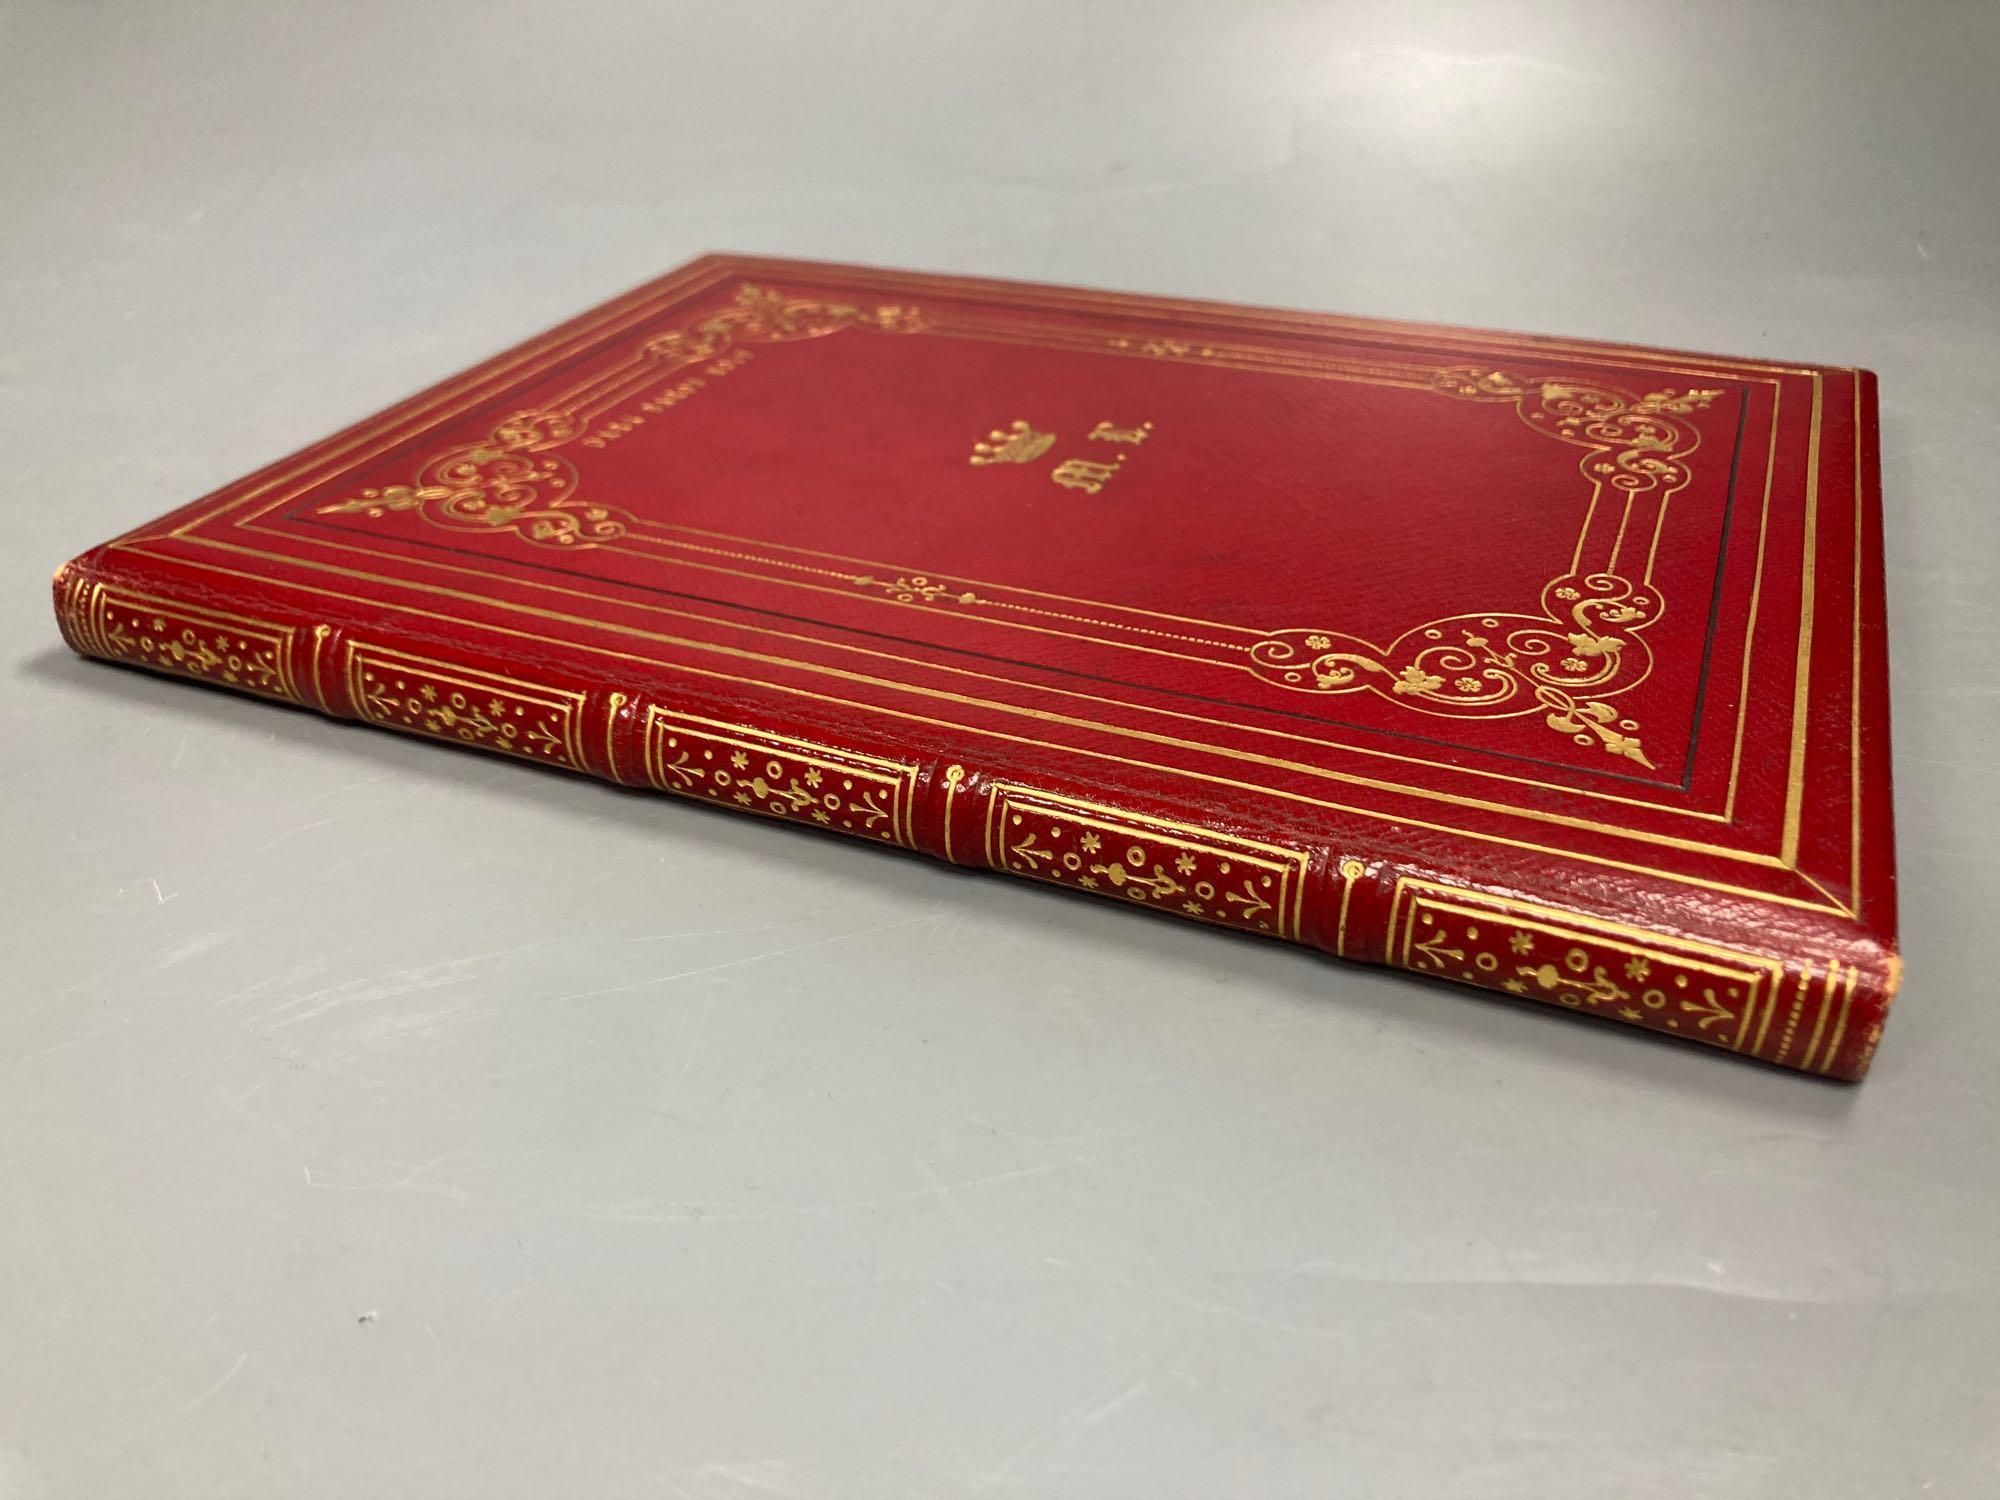 Lindsay family, 1866 red and gilt tooled calf bound, hand written, poem and drawings